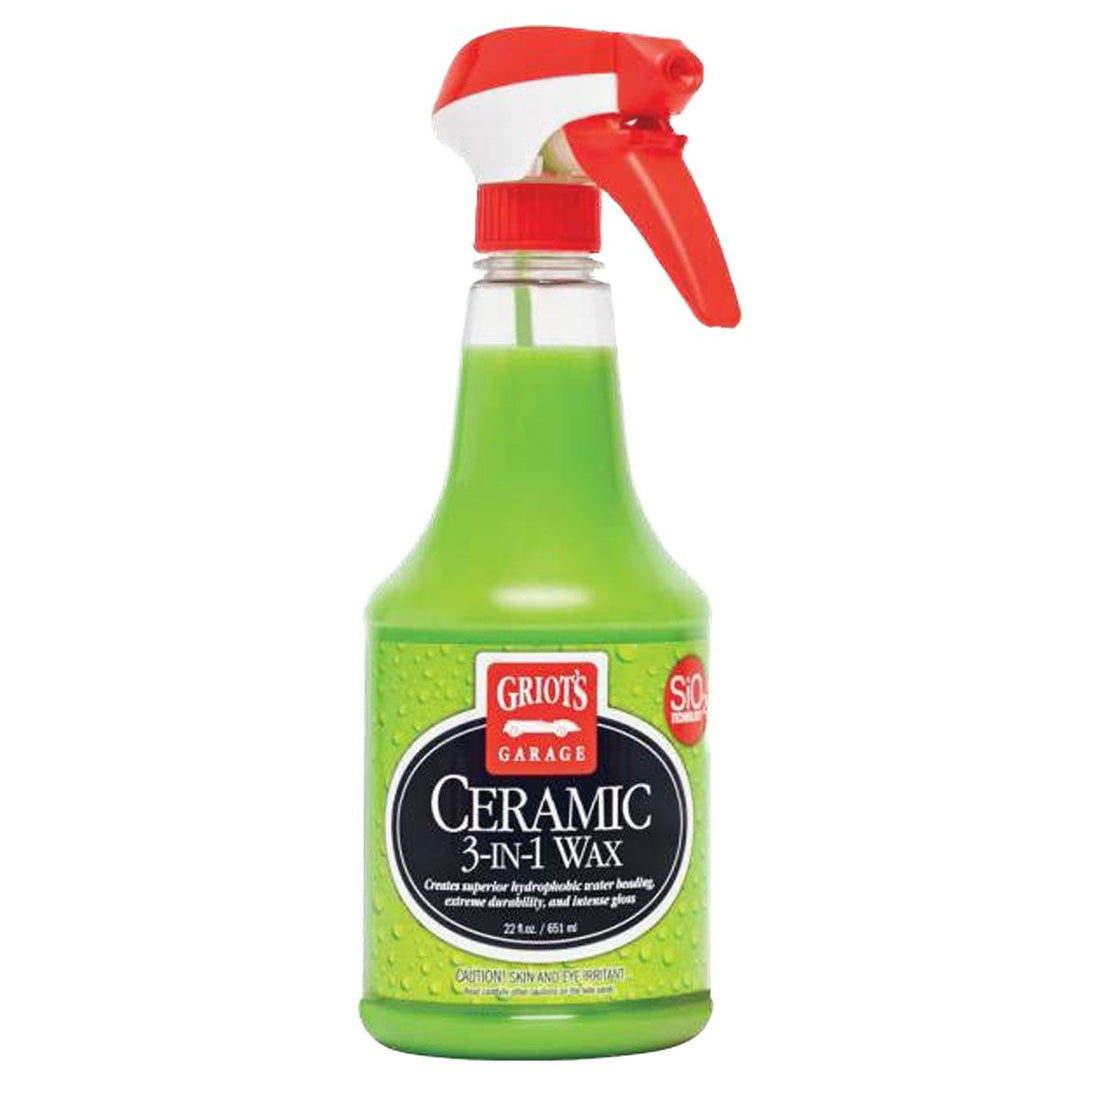 Griot's Garage Ceramic 3-in-1 Wax - Detailing Connect